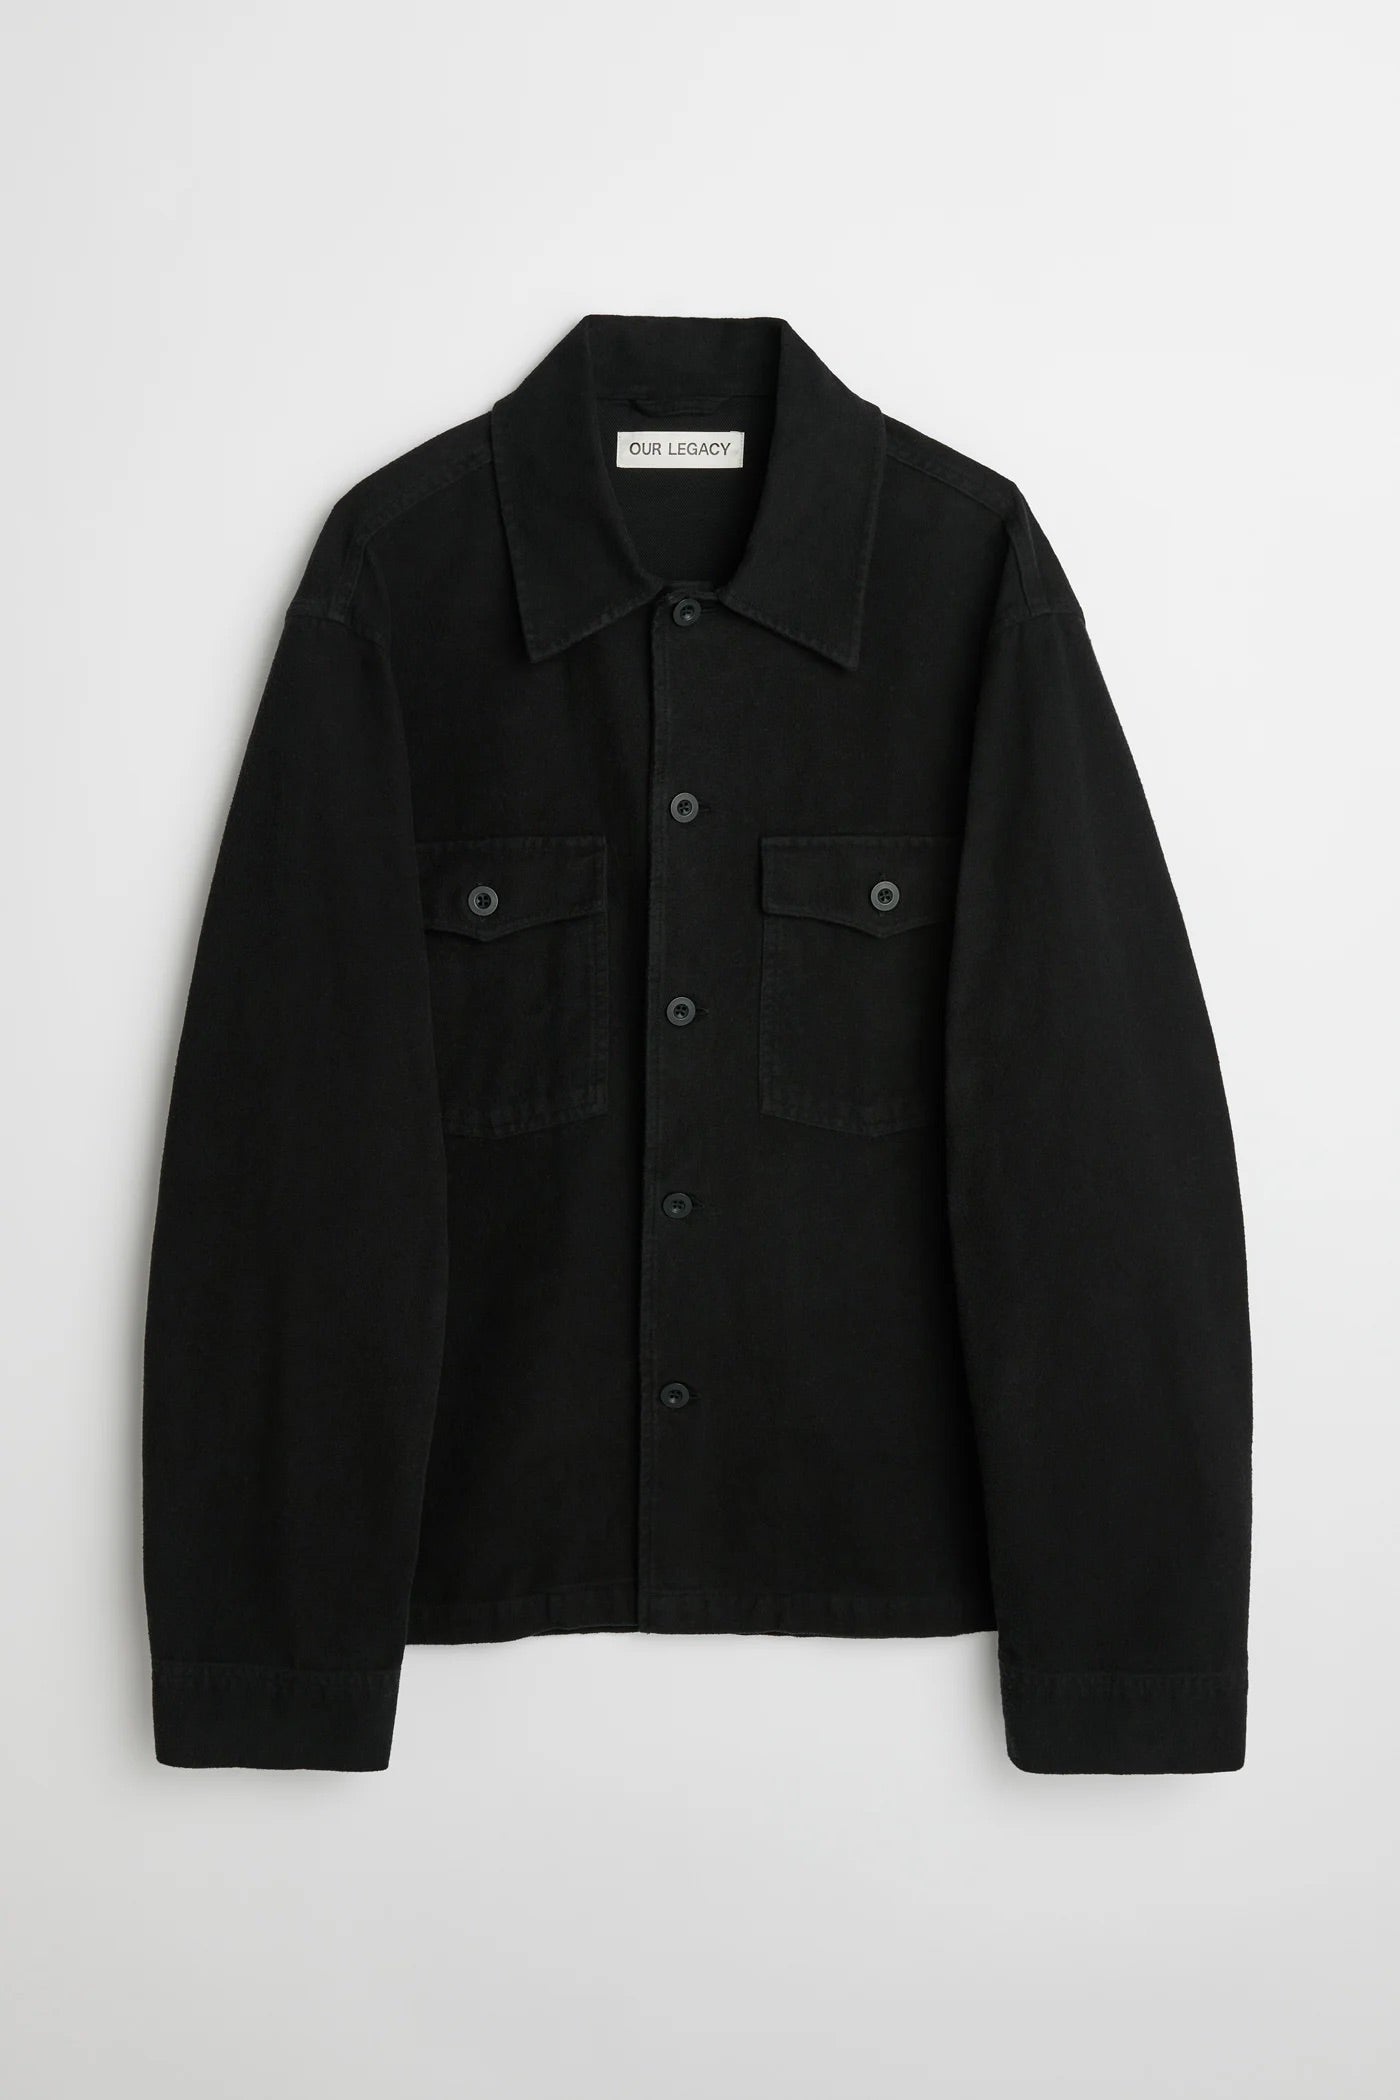 Our legacy evening coach jacket 44袖丈63